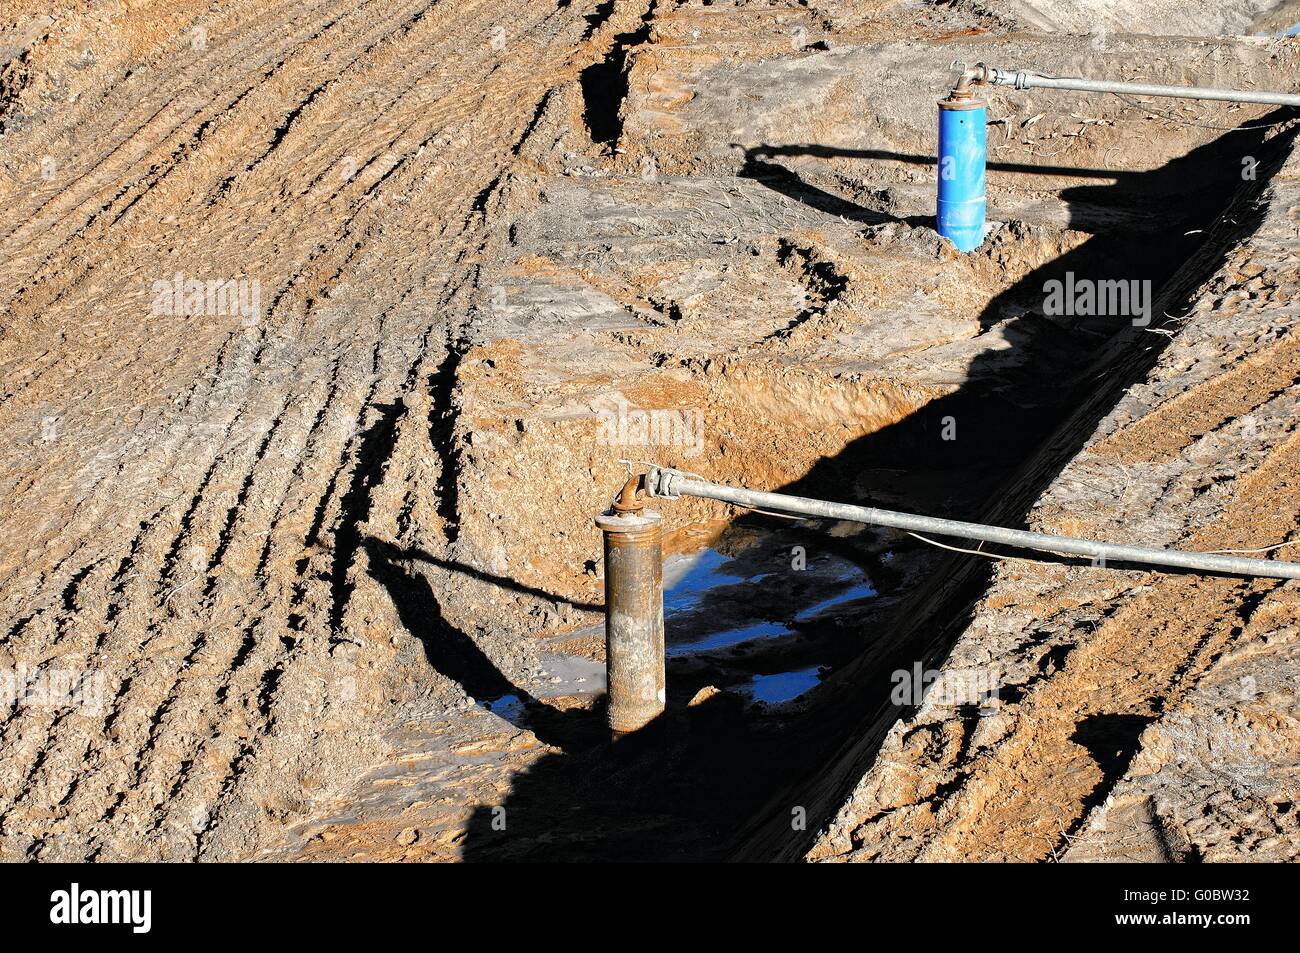 Groundwater conservation during construction work Stock Photo